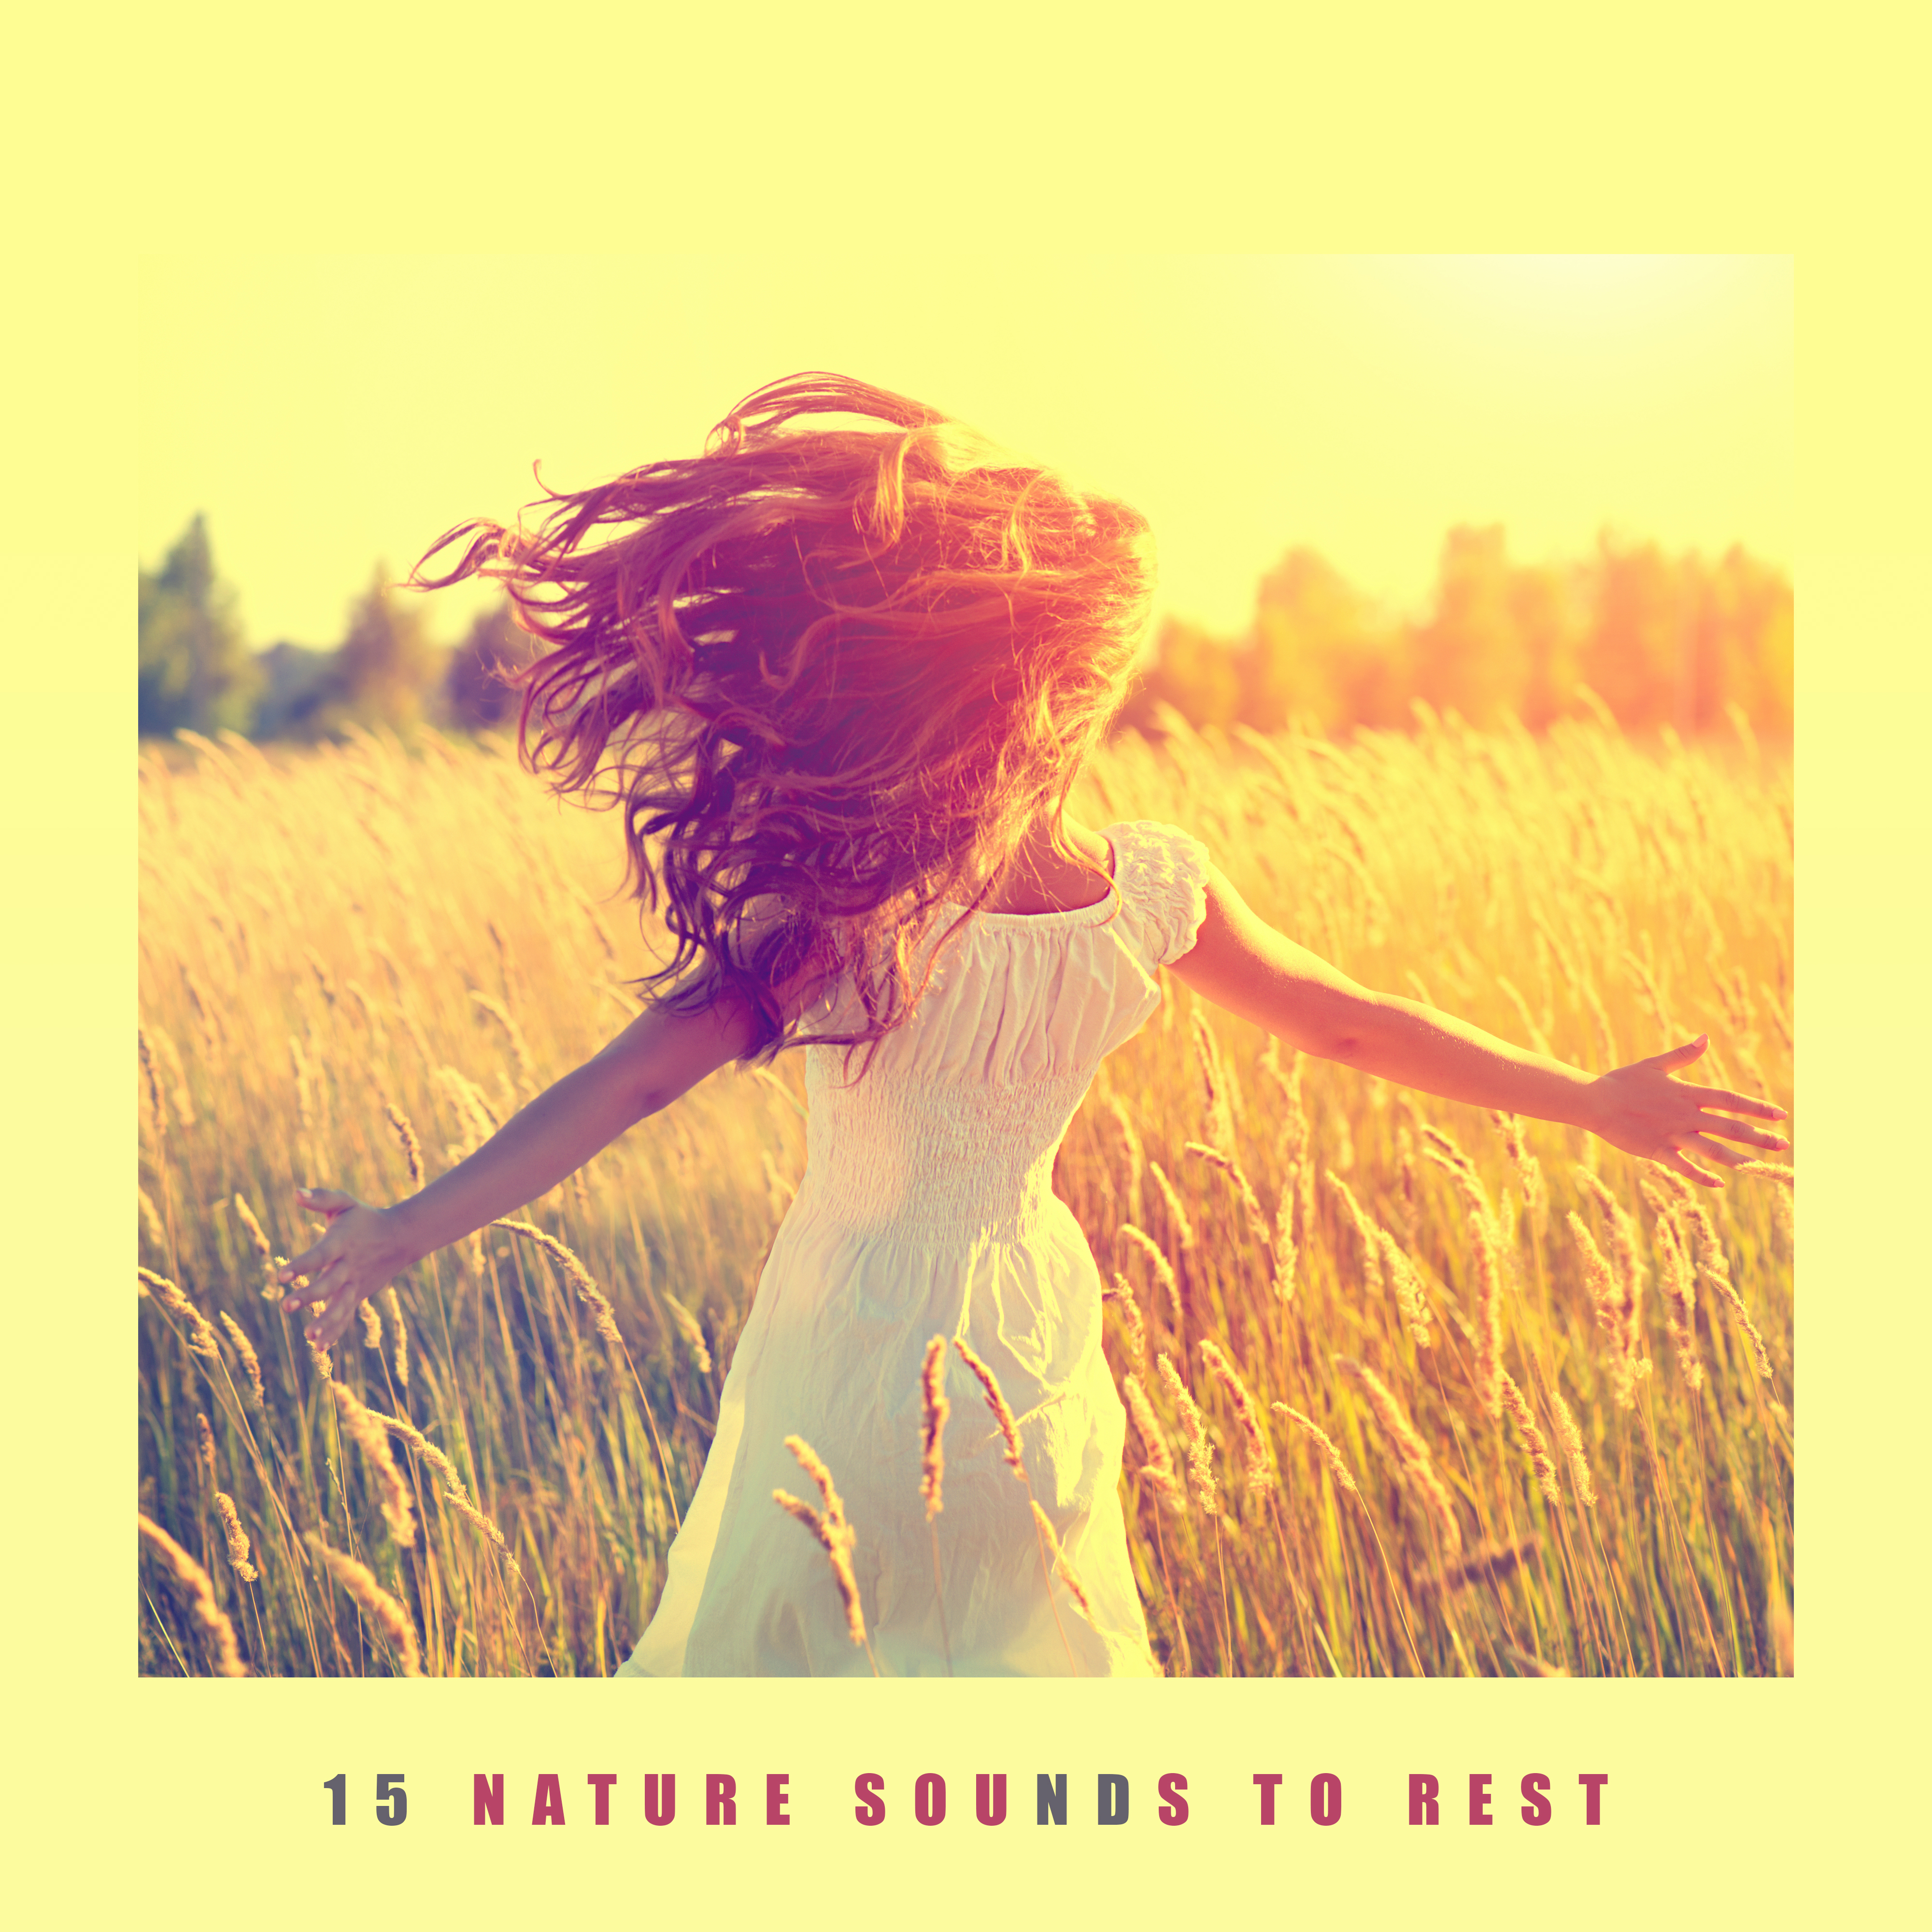 15 Nature Sounds to Rest